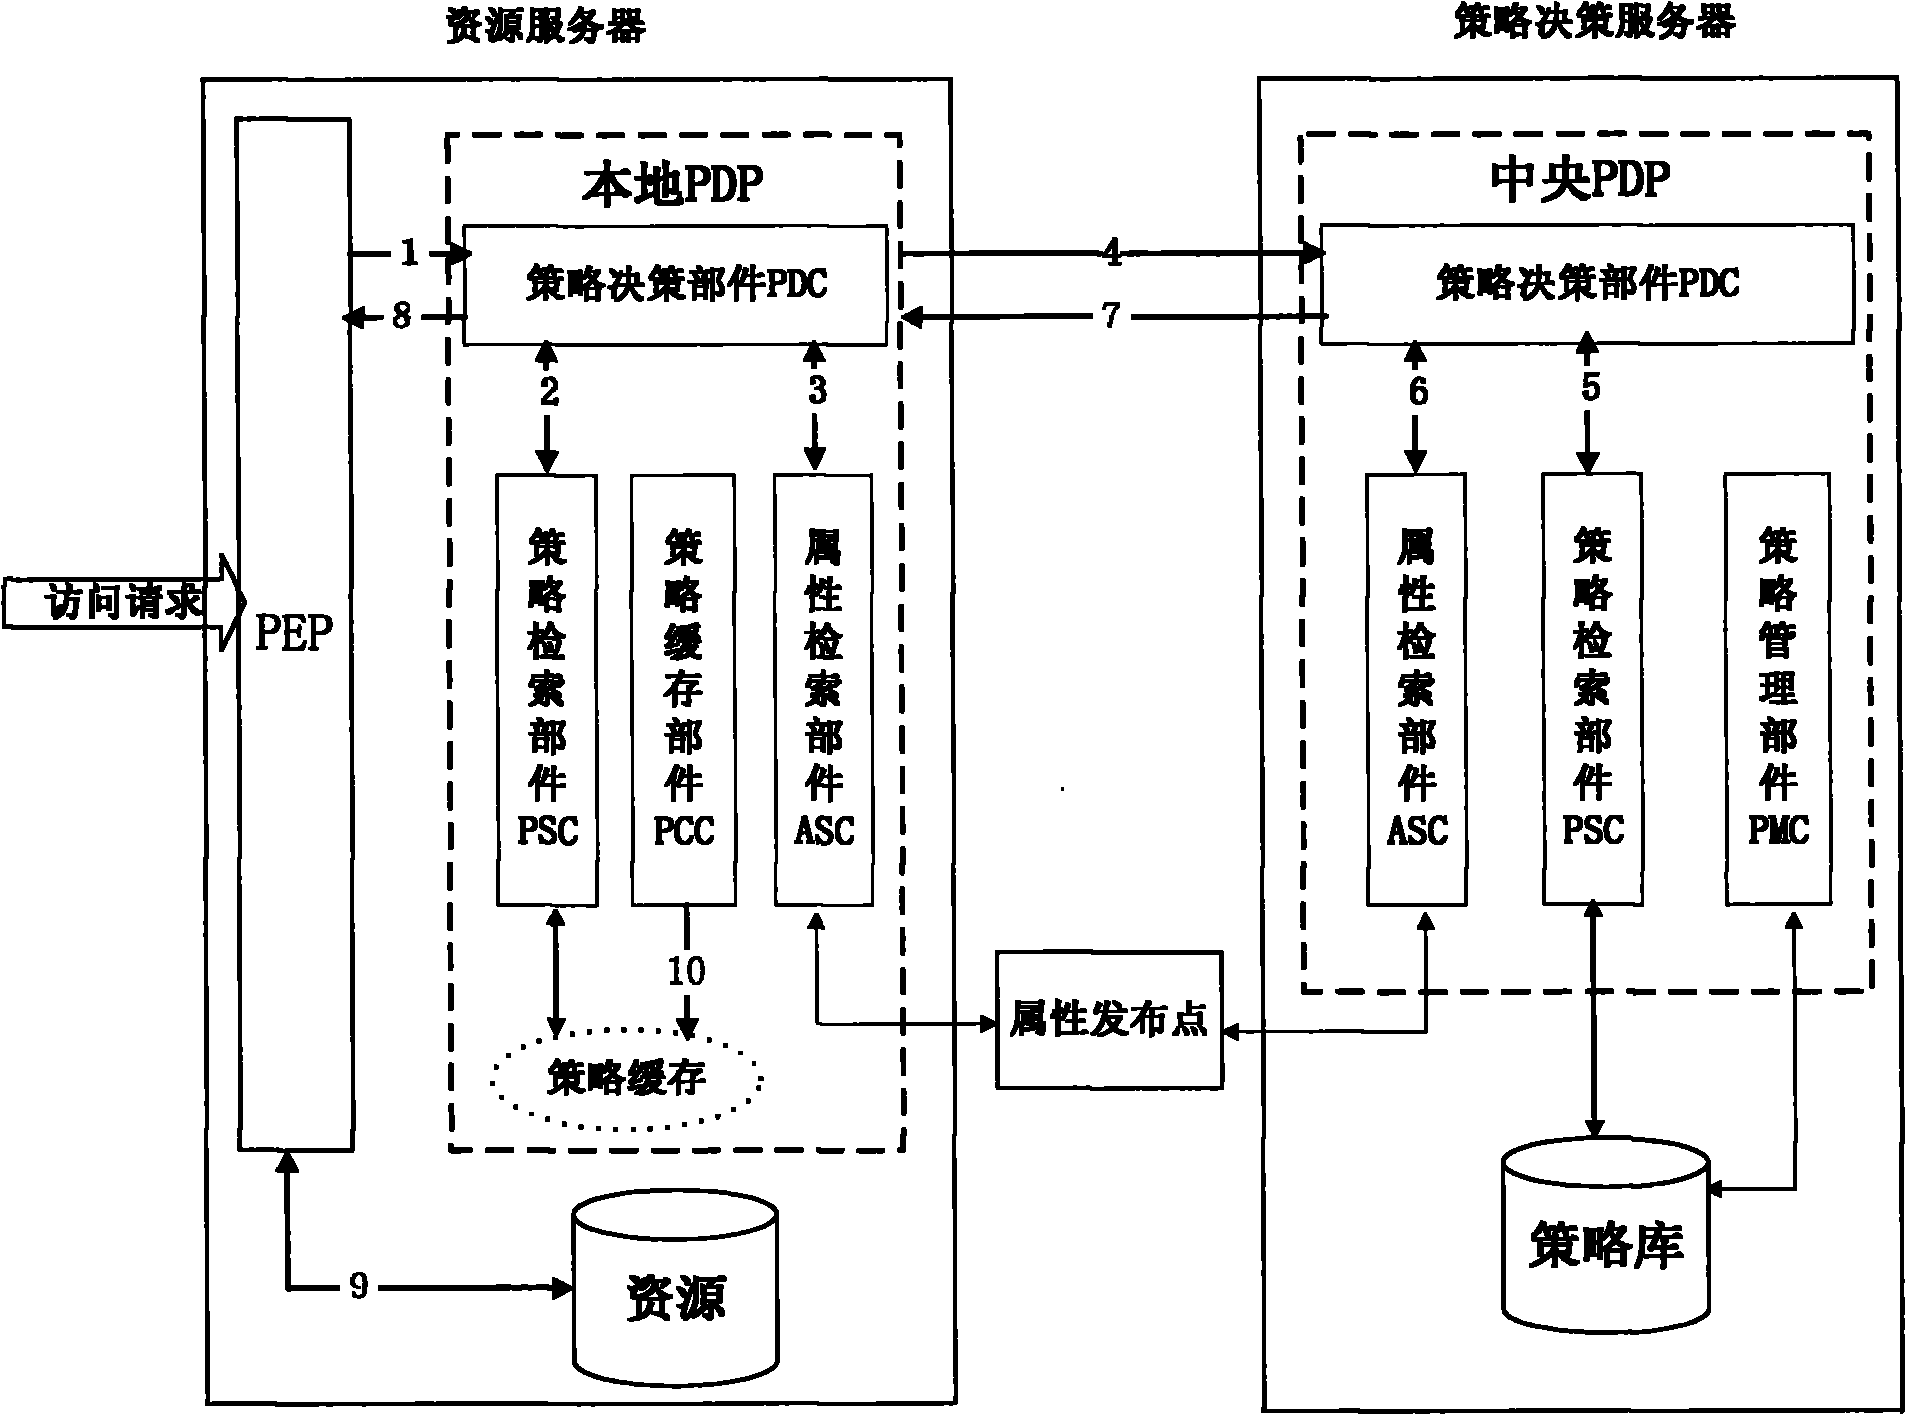 Two-level policy decision-based access control method and system